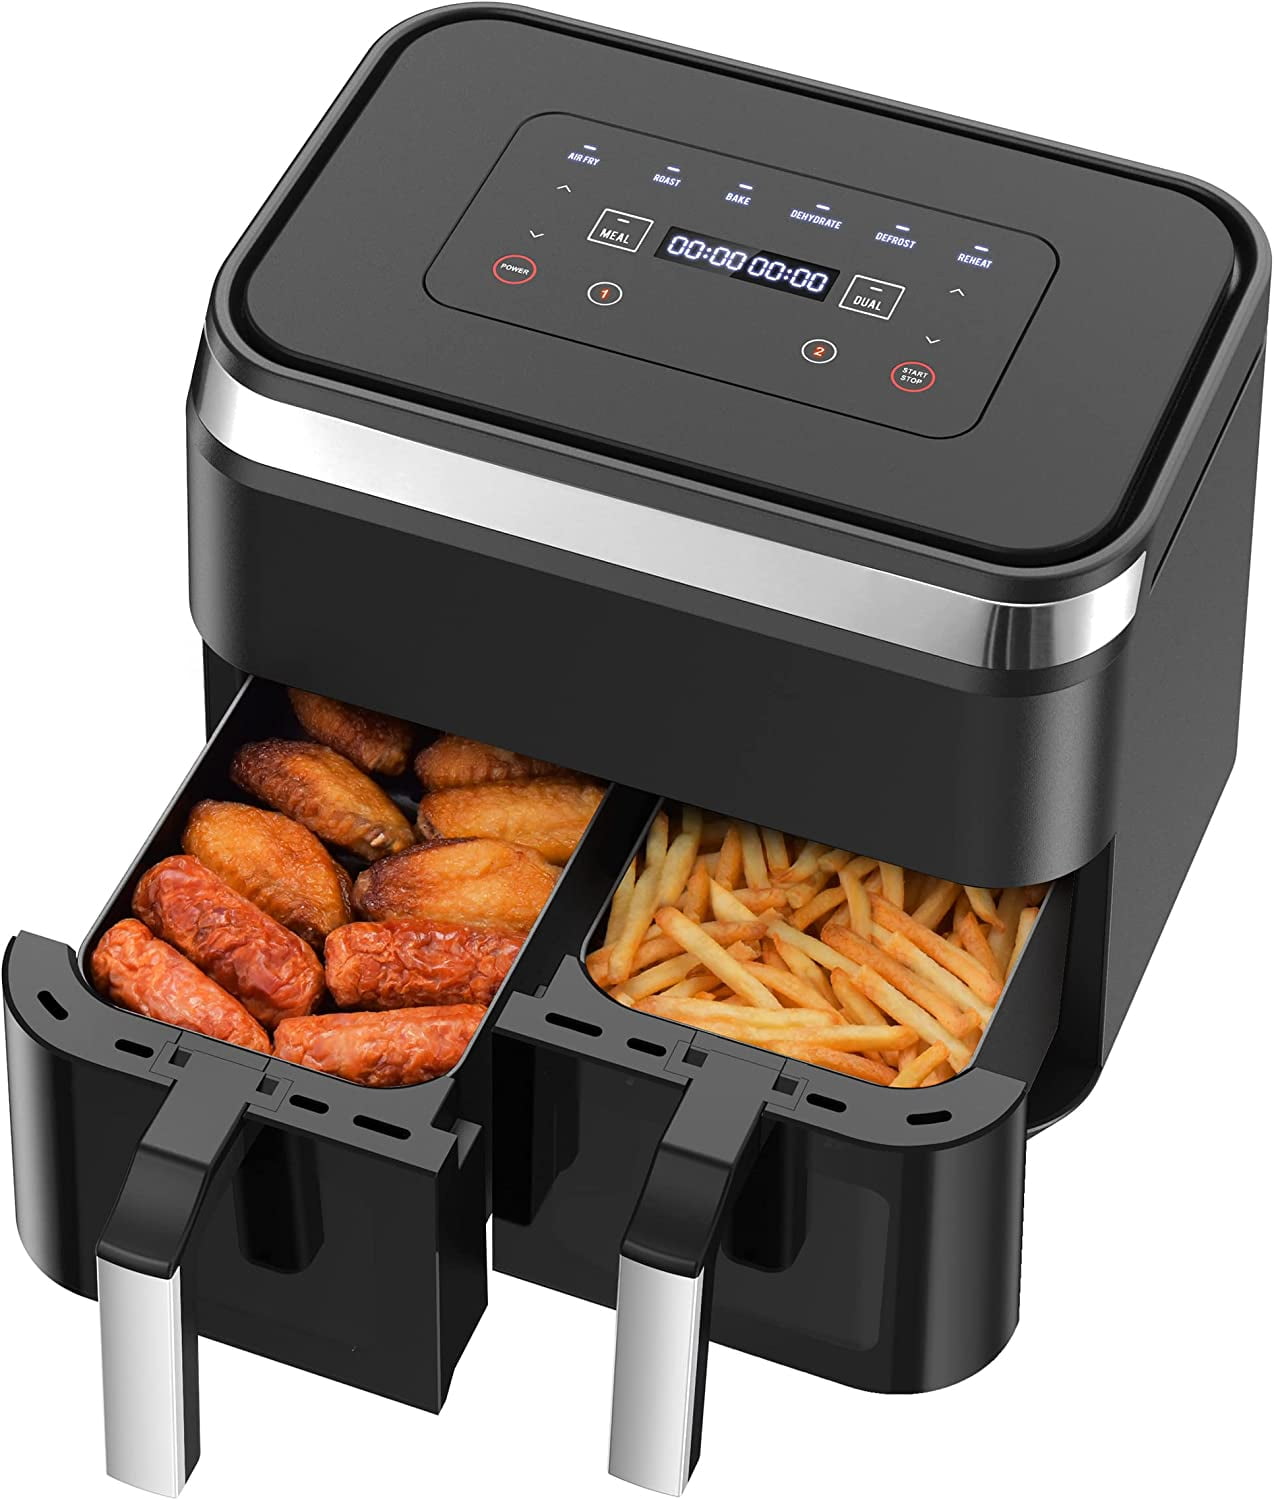 How to Cook in Your Air Fryer: Bake, Broil, Roast and Dehydrate Buttons, Help Around the Kitchen : Food Network